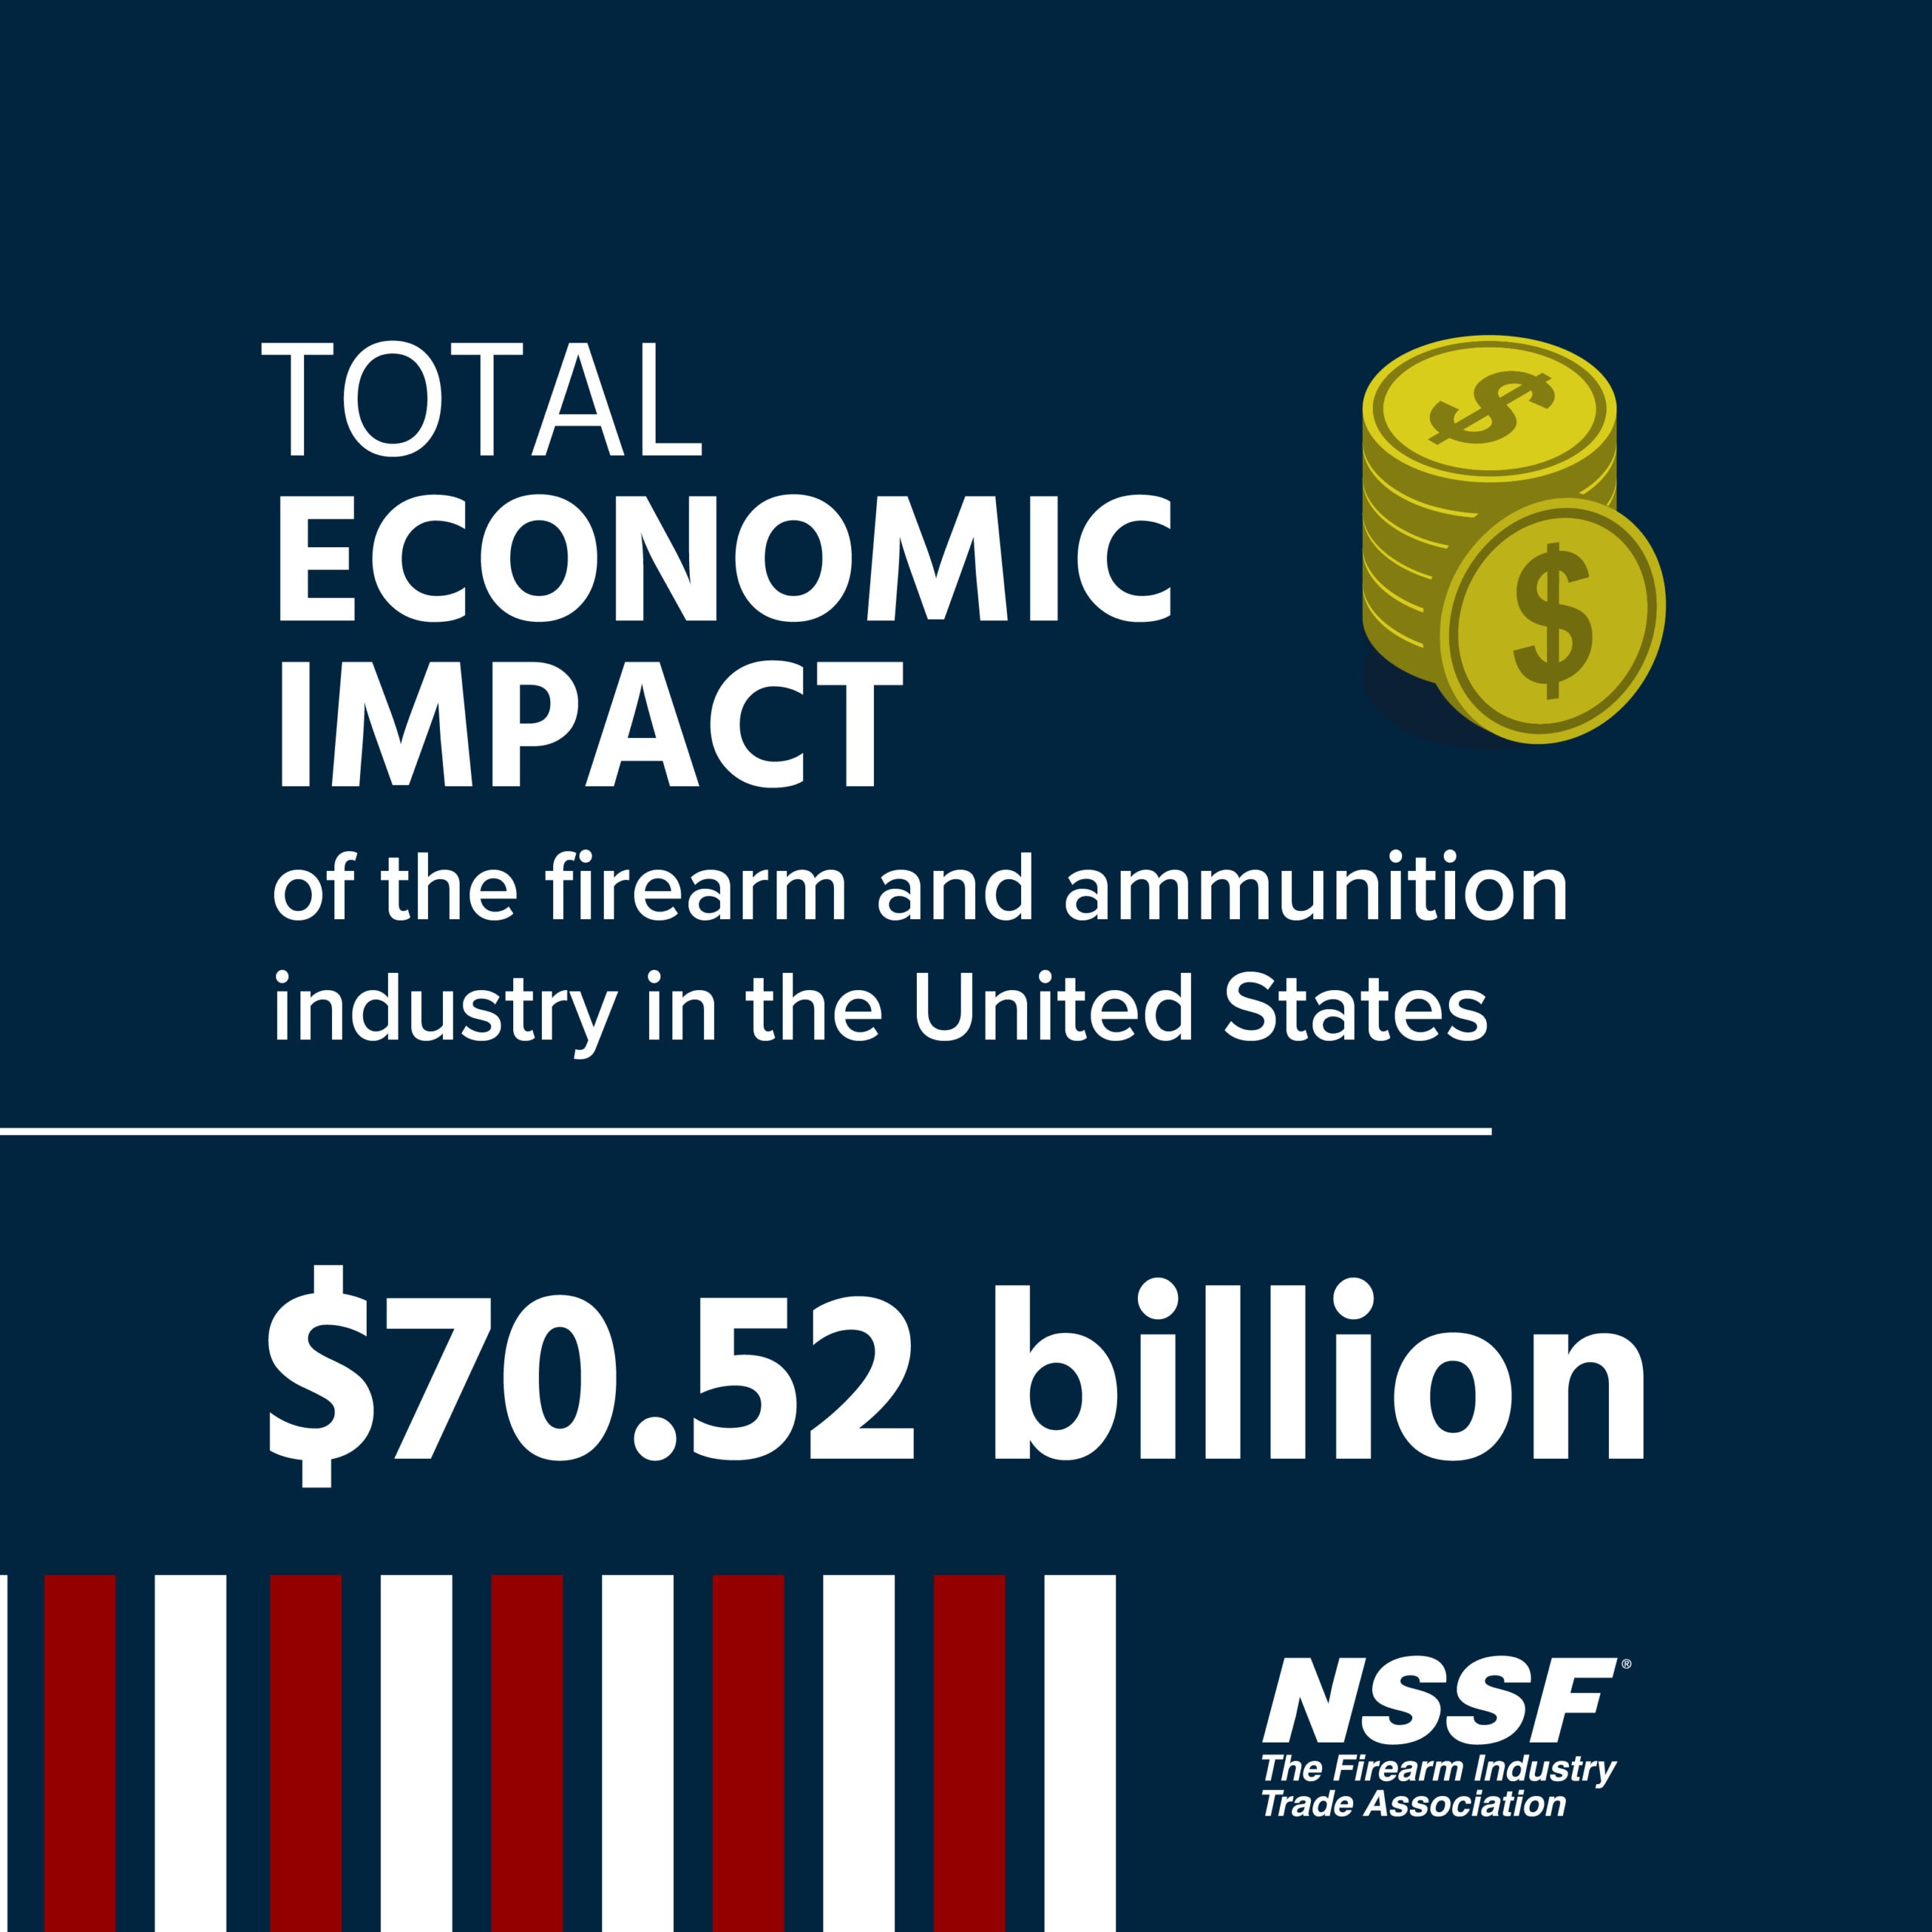 NSSF+released+the+2022+Economic+Impact+Report+showing+the+U.S.+firearm+and+ammunition+industry+economic+impacts+increased+from+$19.1+billion+in+2008+to+$70.52+billion+in+2021,+a+269+percent+increase.